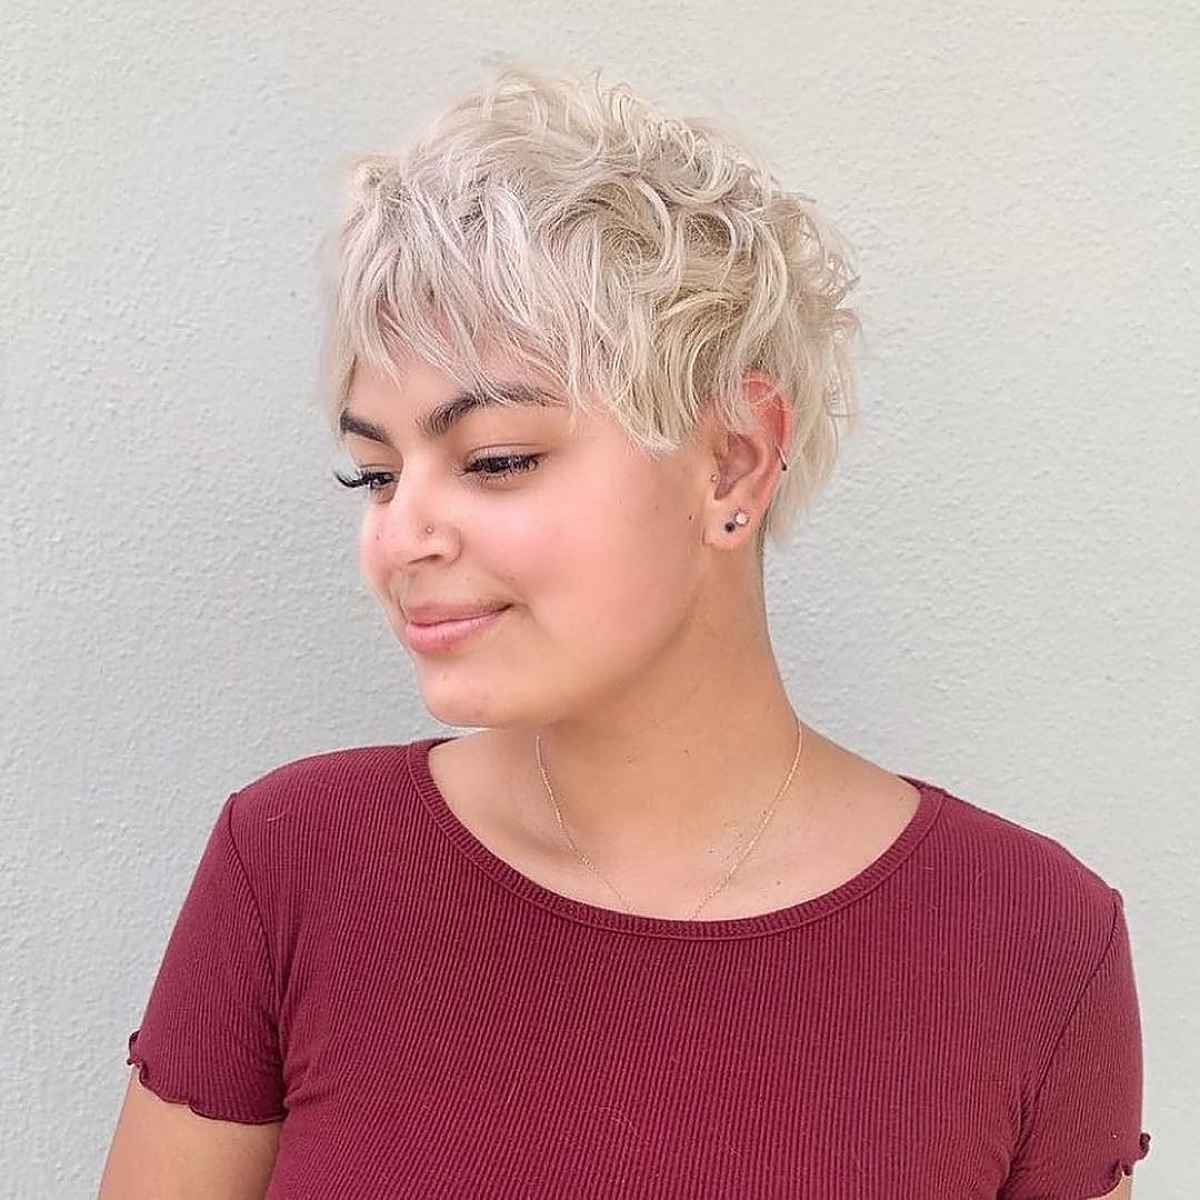 21 Types of Choppy Pixie Cuts Women Are Asking for This Year